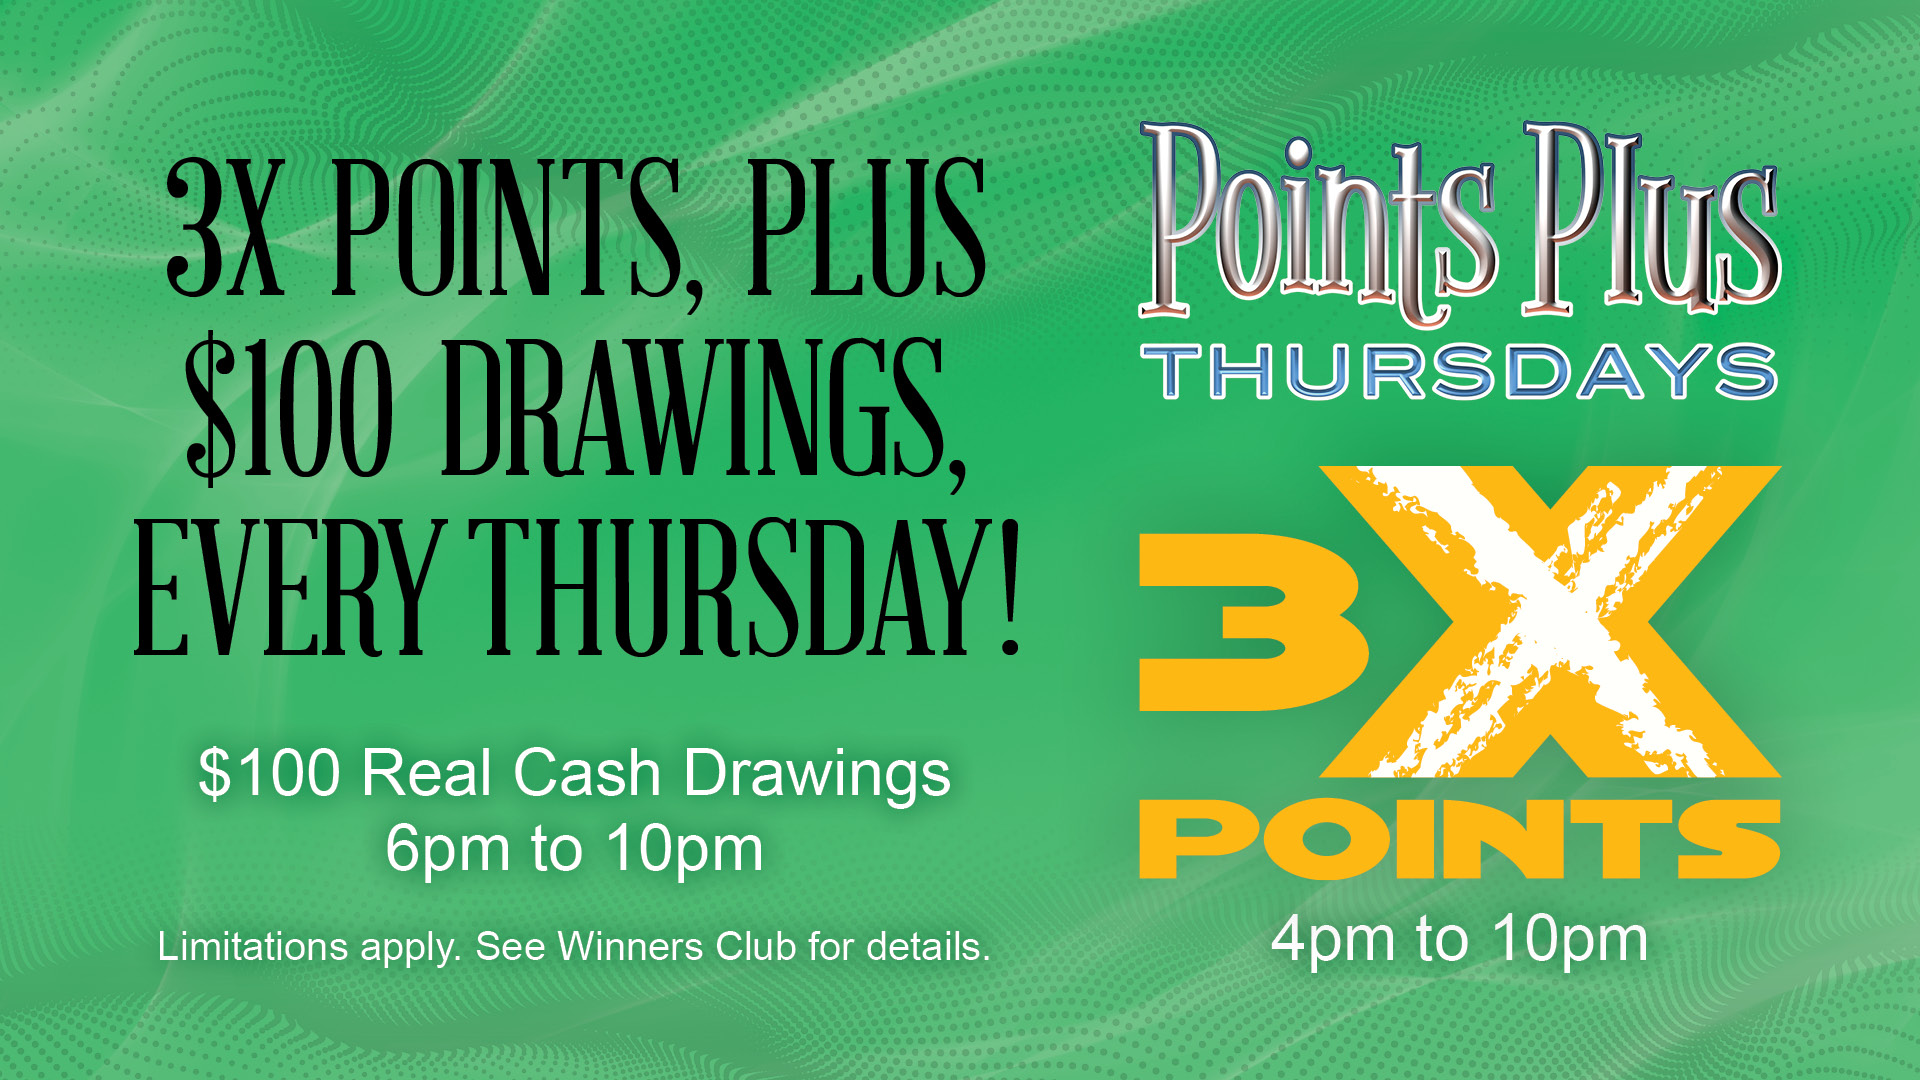 Points Plus Thursdays: 3X Points 4pm to 10pm. 3X Points, Plus $100 Drawings, Every Thursday! $100 Real Cash Drawings 6pm to 10pm. Limitations apply. See Winners Club for details.